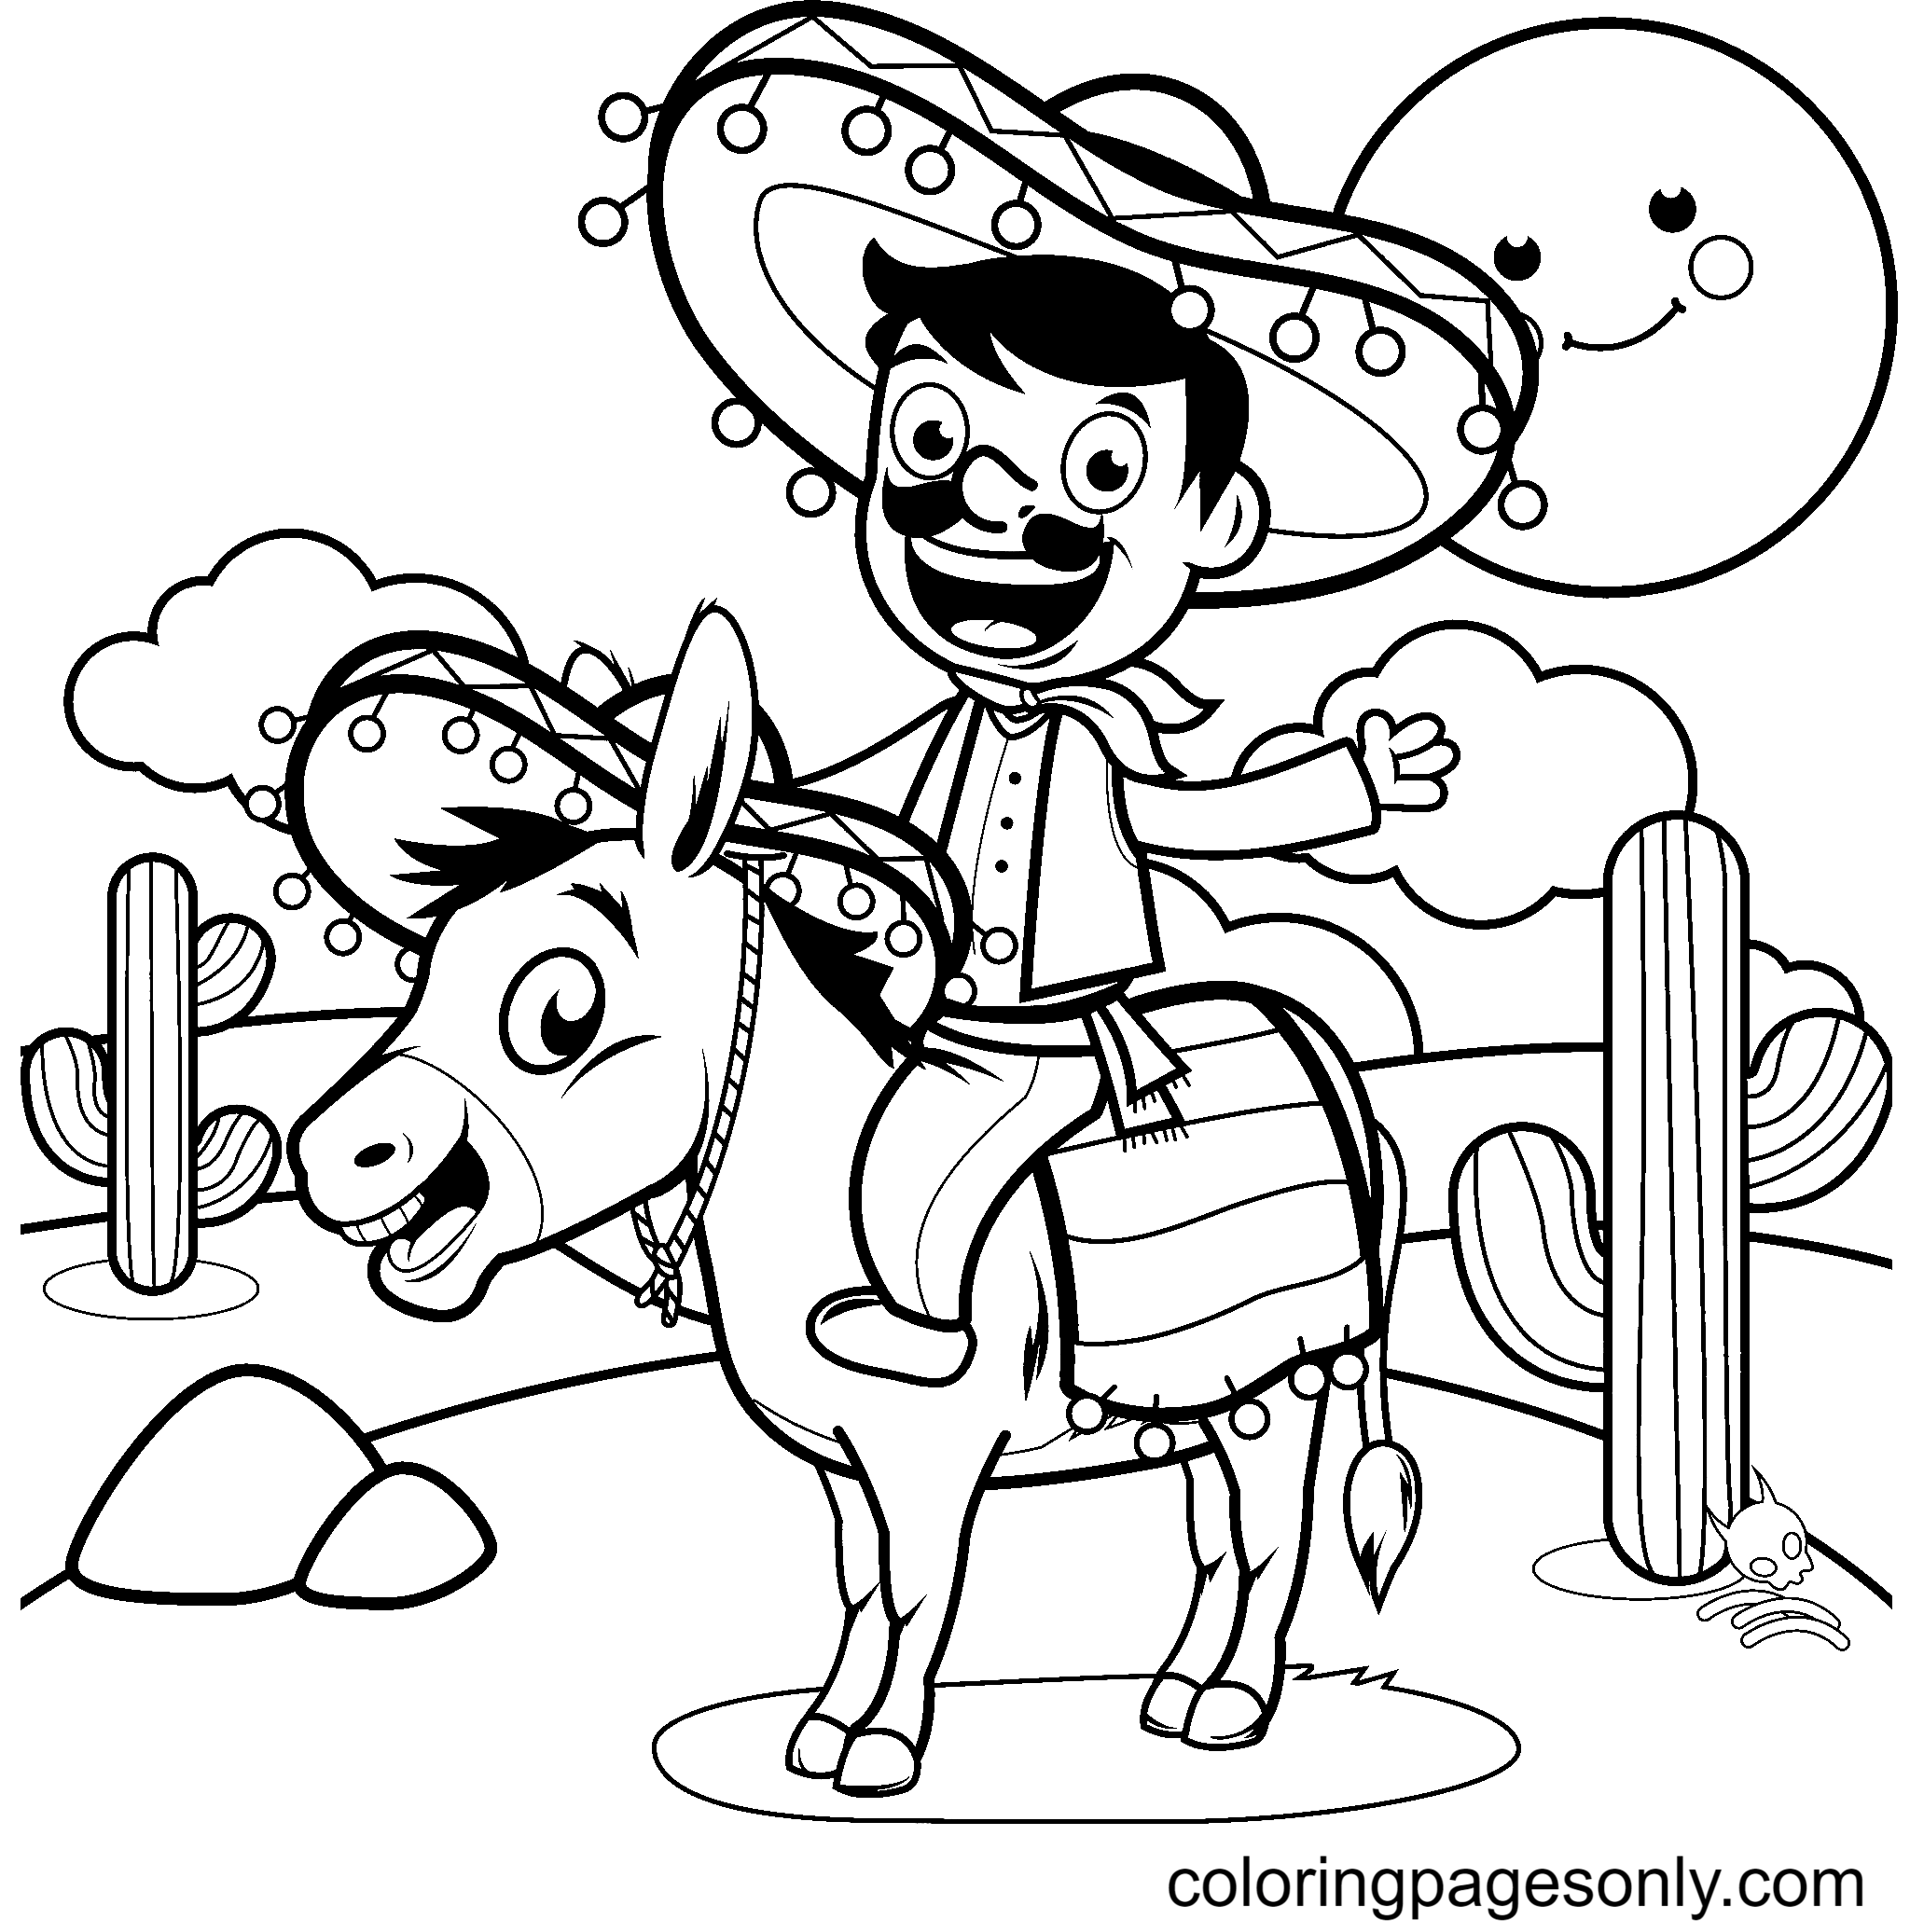 Mexican Man with Donkey Coloring Page